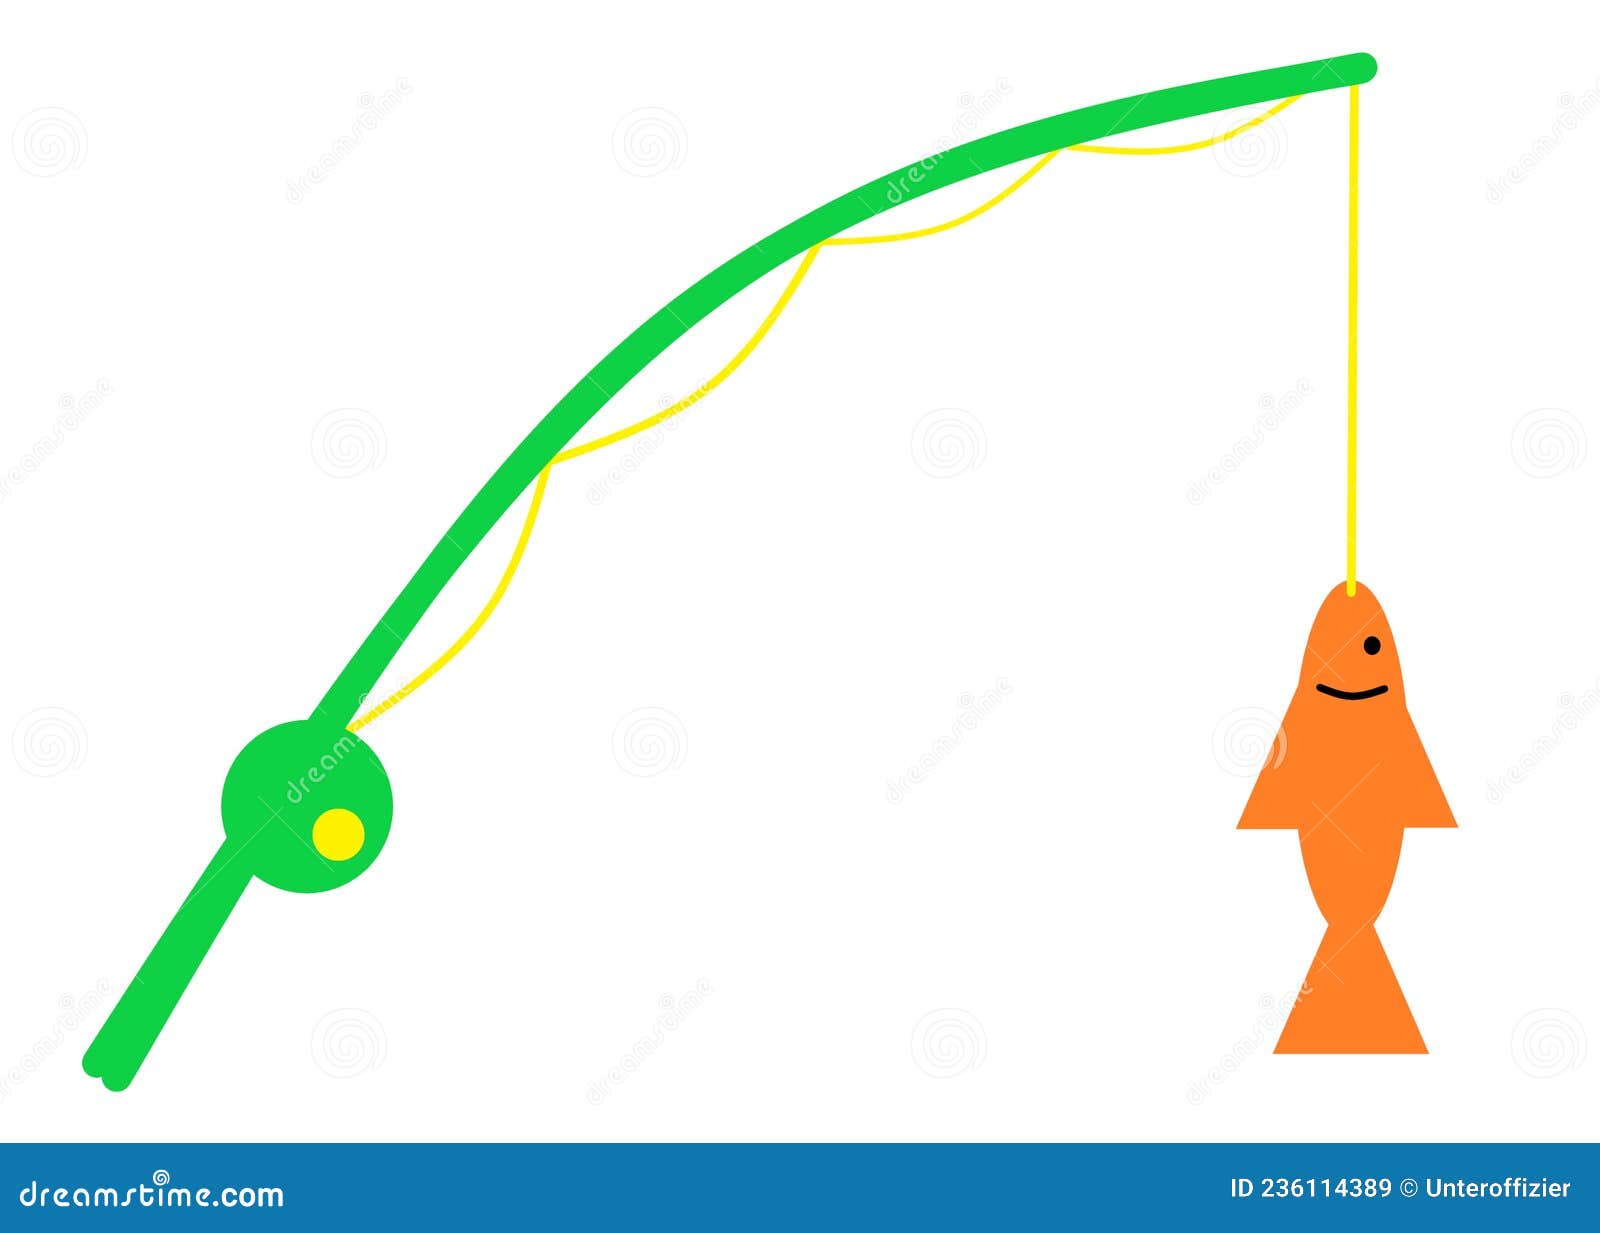 A Bright Green Fishing Rod Hooked Up on an Orange Fish Fishing